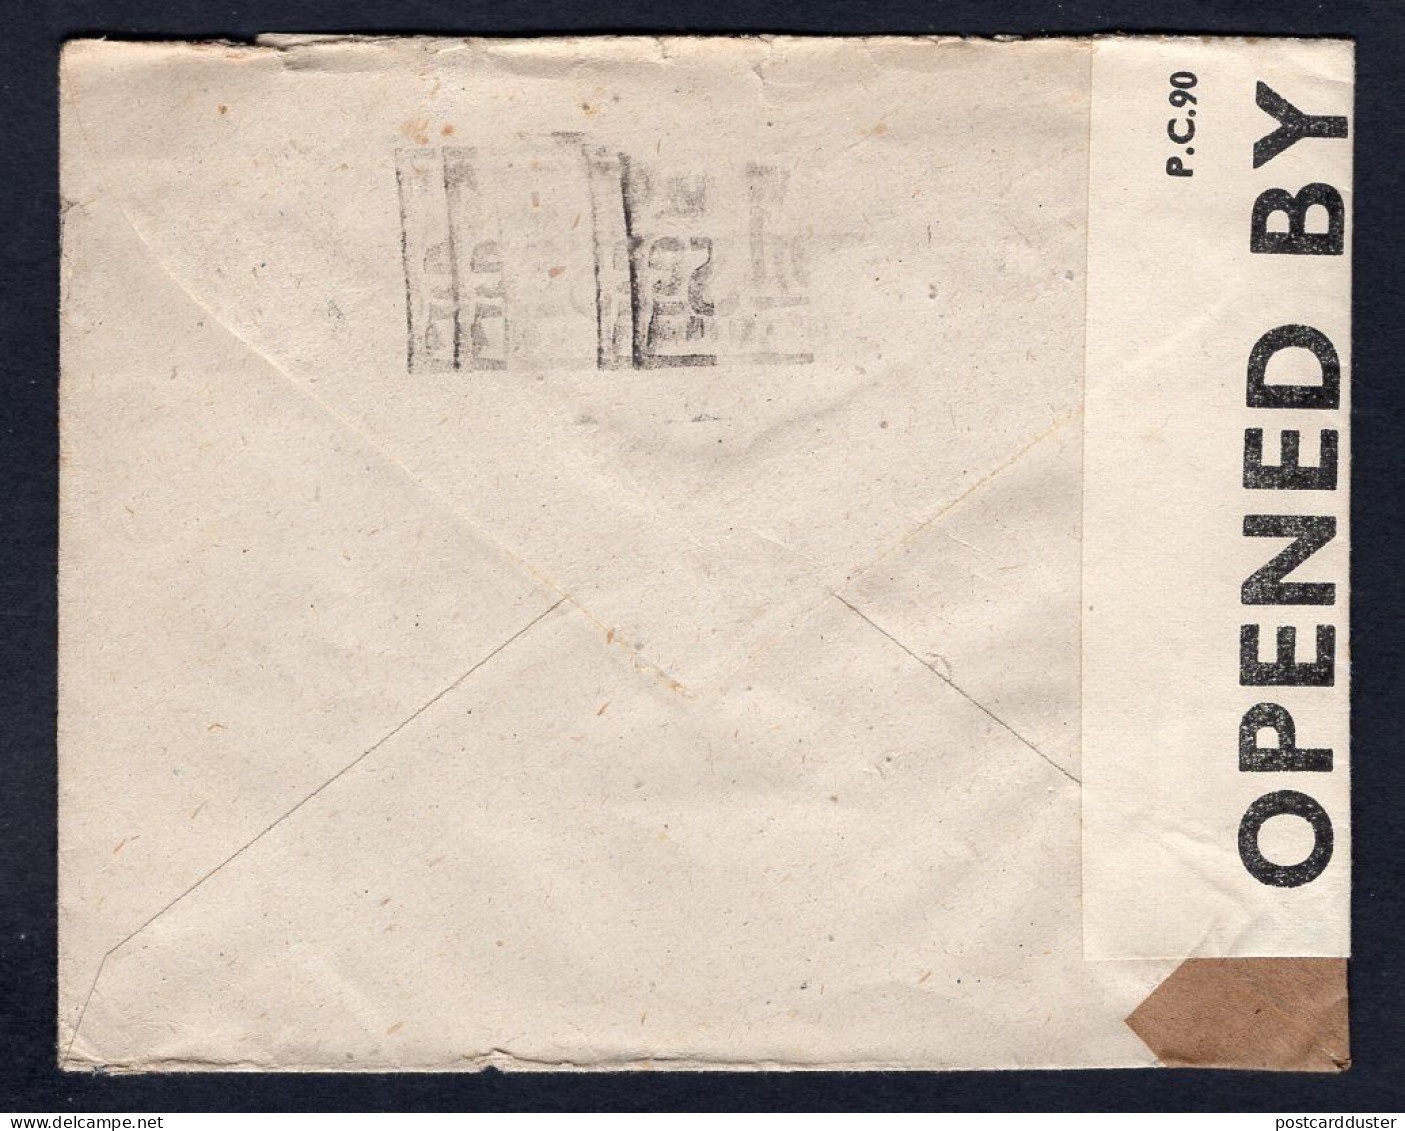 IRELAND 1943 Censored Cover To Canada (p1665) - Covers & Documents